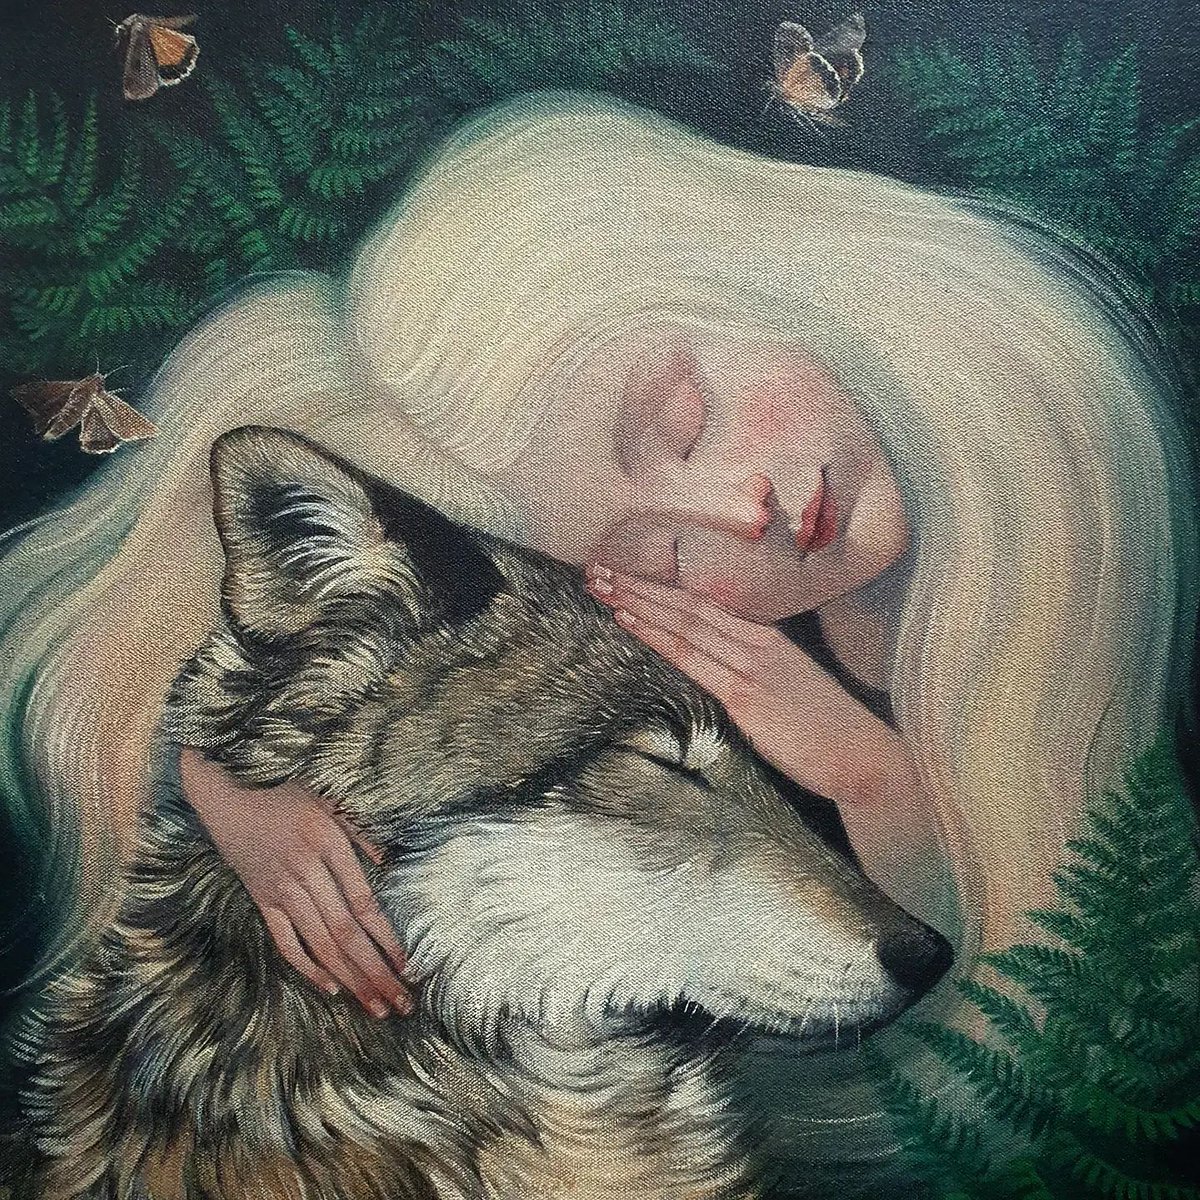 'This Wild Love' by lucy_campbell_art recently exhibited at @greengallerylifestyle in Scotland - we love the textures of the fur and hair against the soft ferns! 

#beautifulbizarre #lucycampbell #lucycampbellartist #scottishartist #newpainting #acryliconcanvas #wildlove